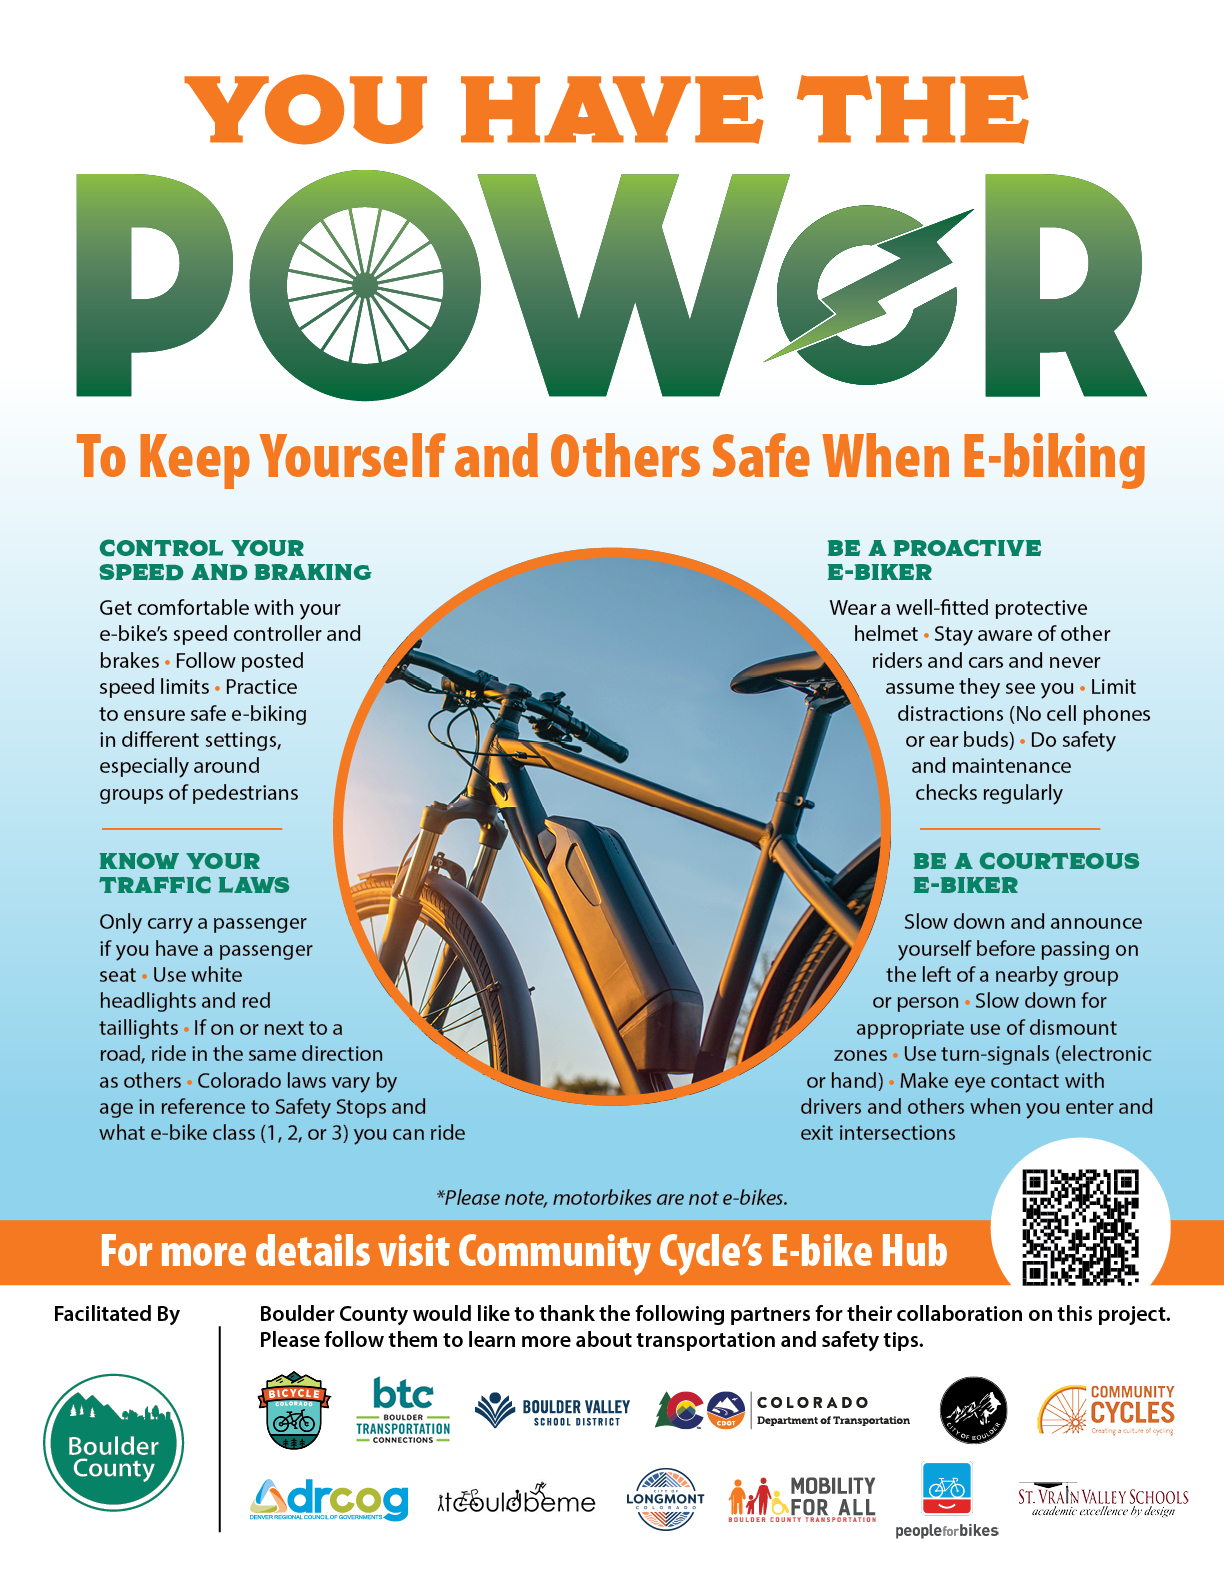 Youth Transportation flier featuring a picture of a bike and text about safety